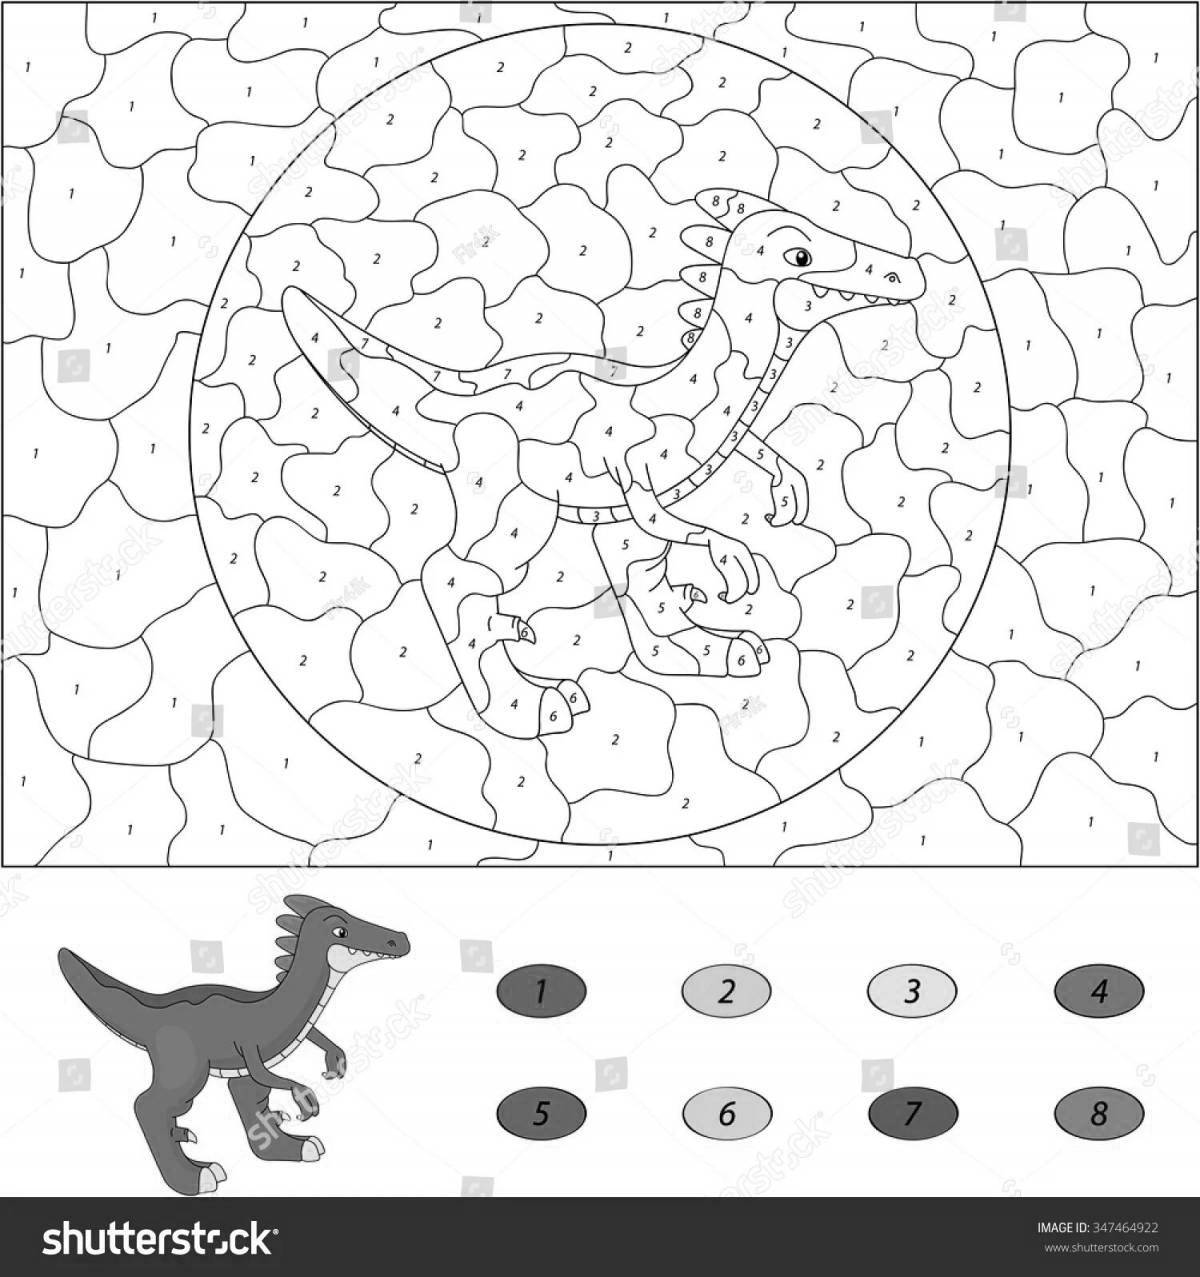 Dinosaurs playful coloring by numbers